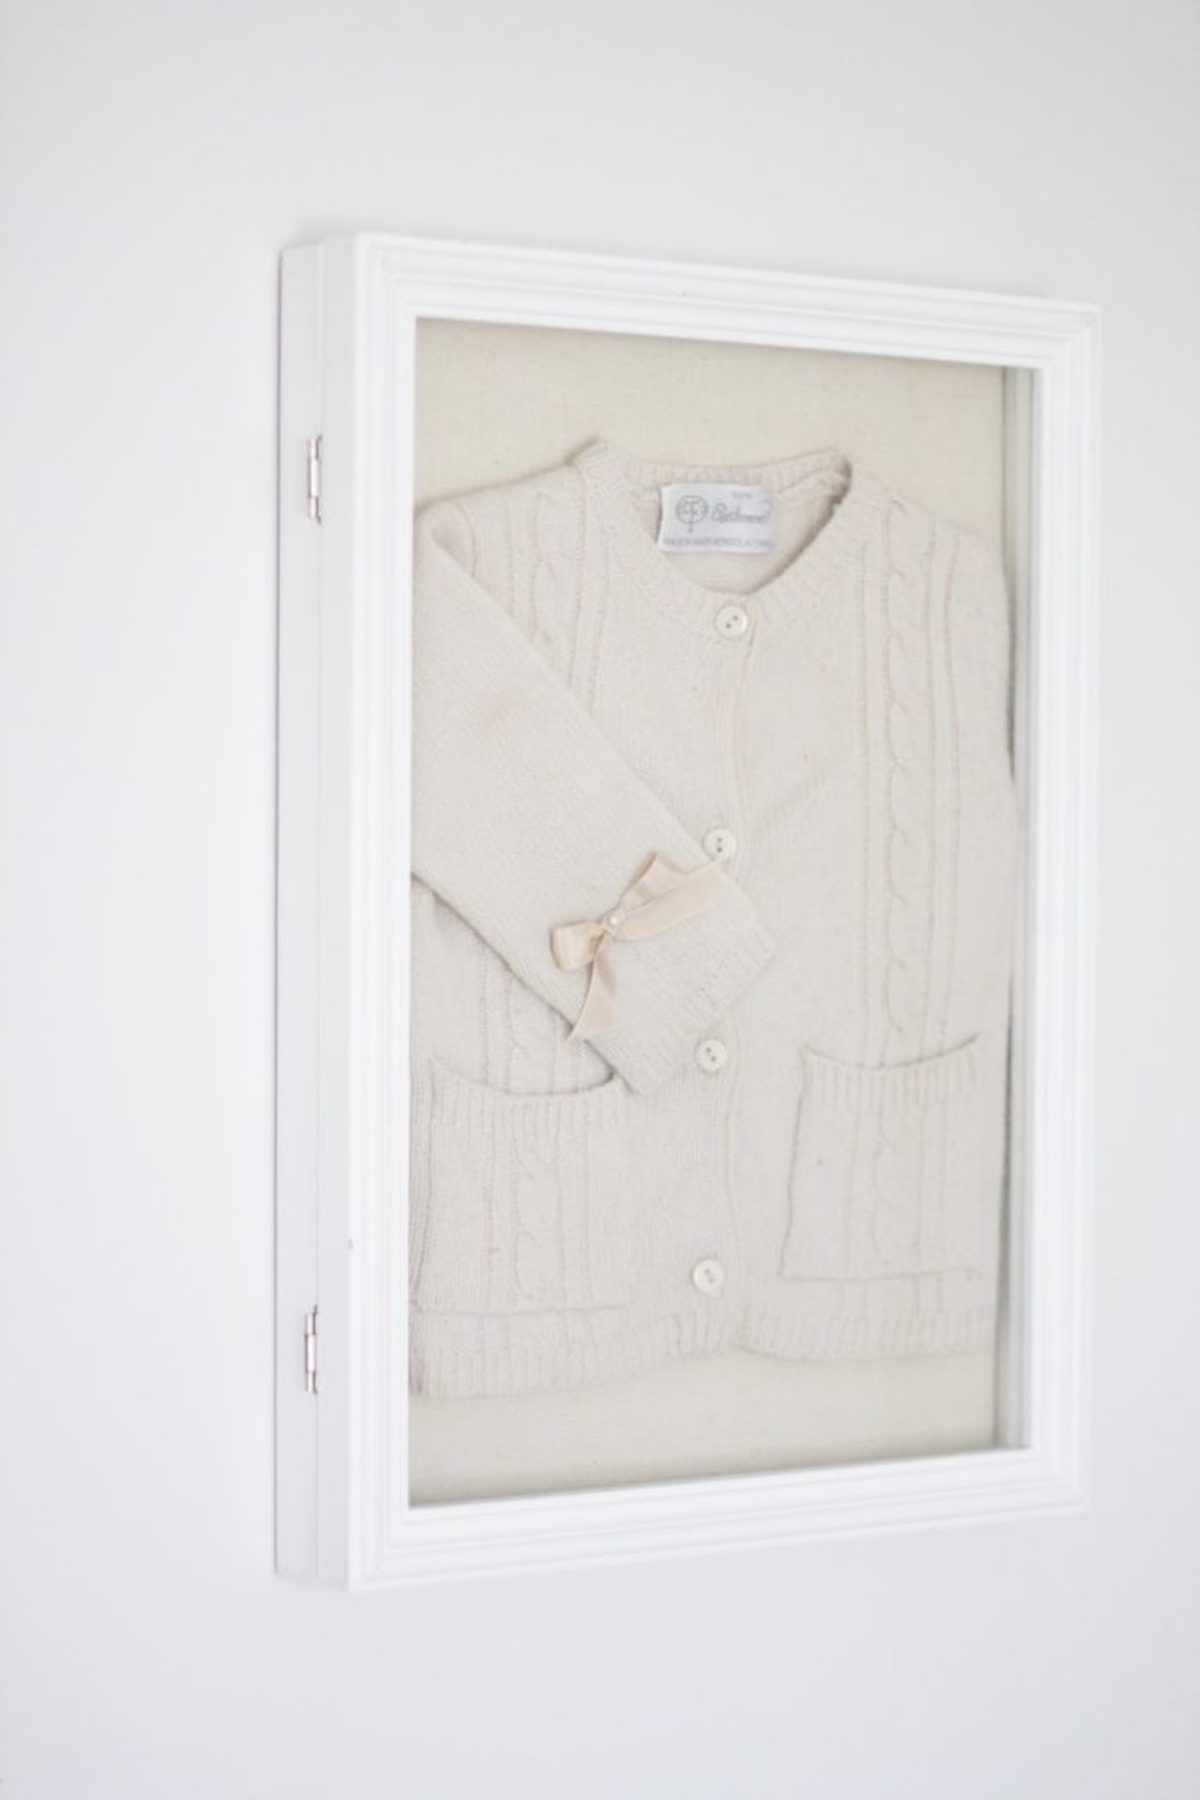 A white frame serving as stylish DIY wall decor, adorned with a white sweater.